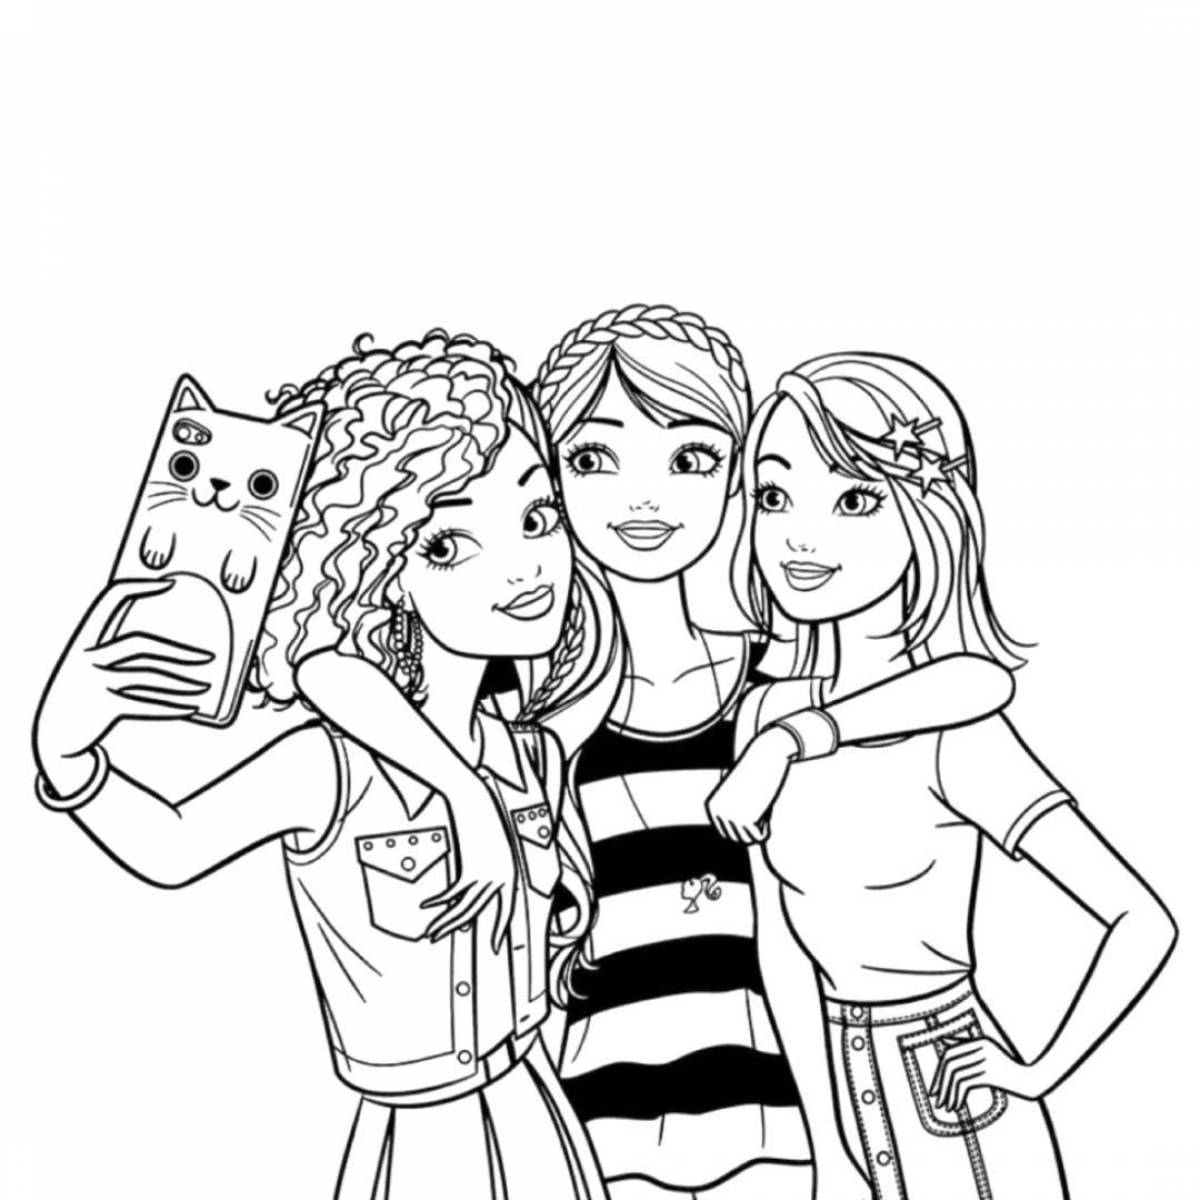 Color-frenzy coloring page video for girls